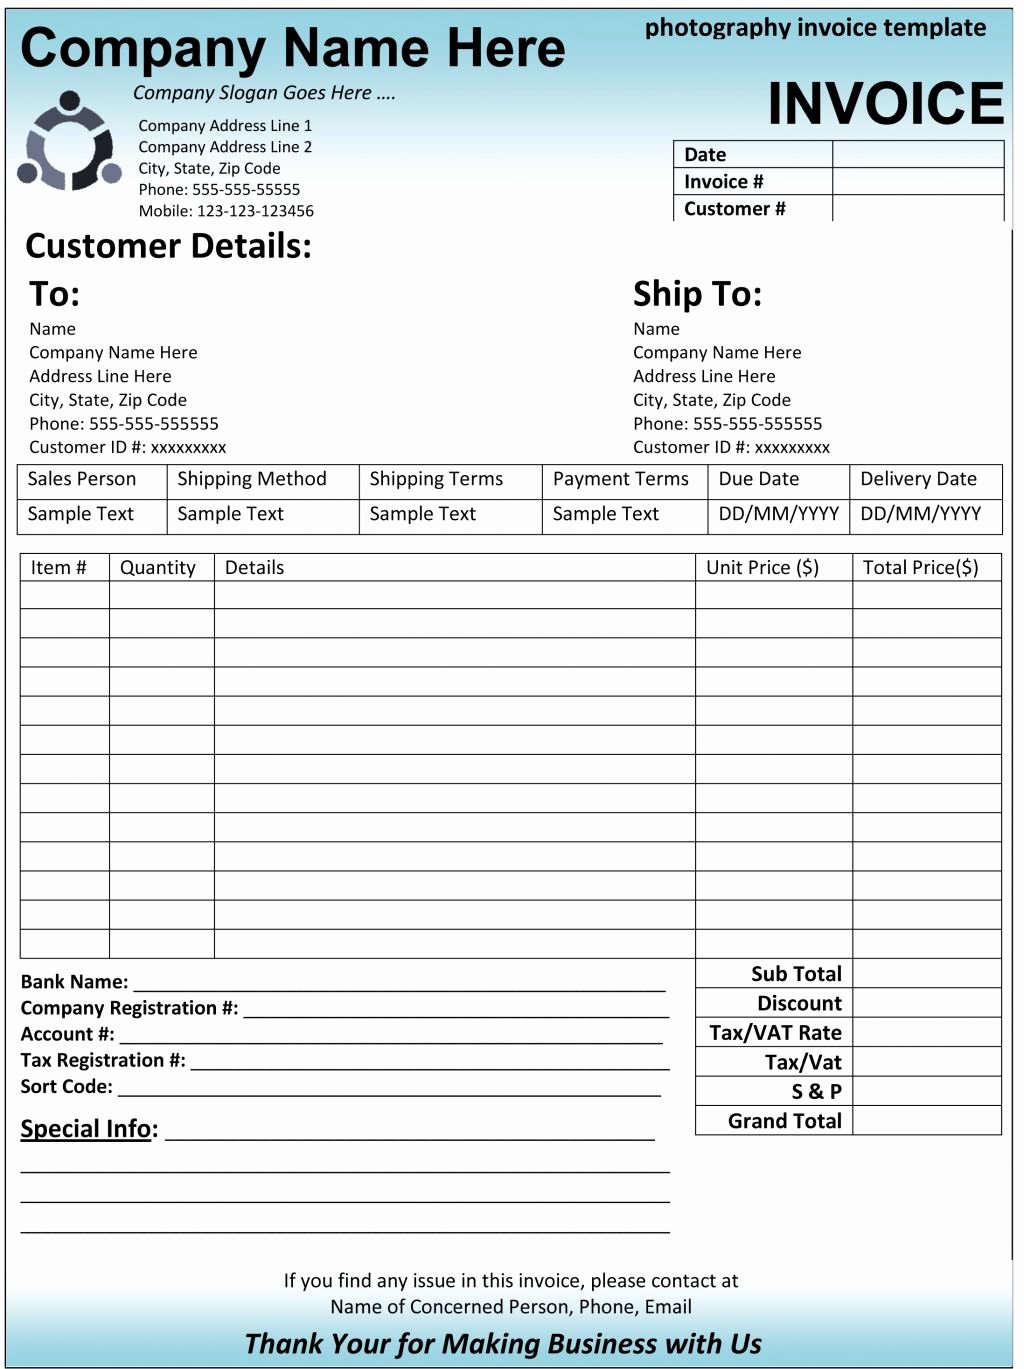 Free Contractor Invoice Template New Contractor Invoice Template Nz